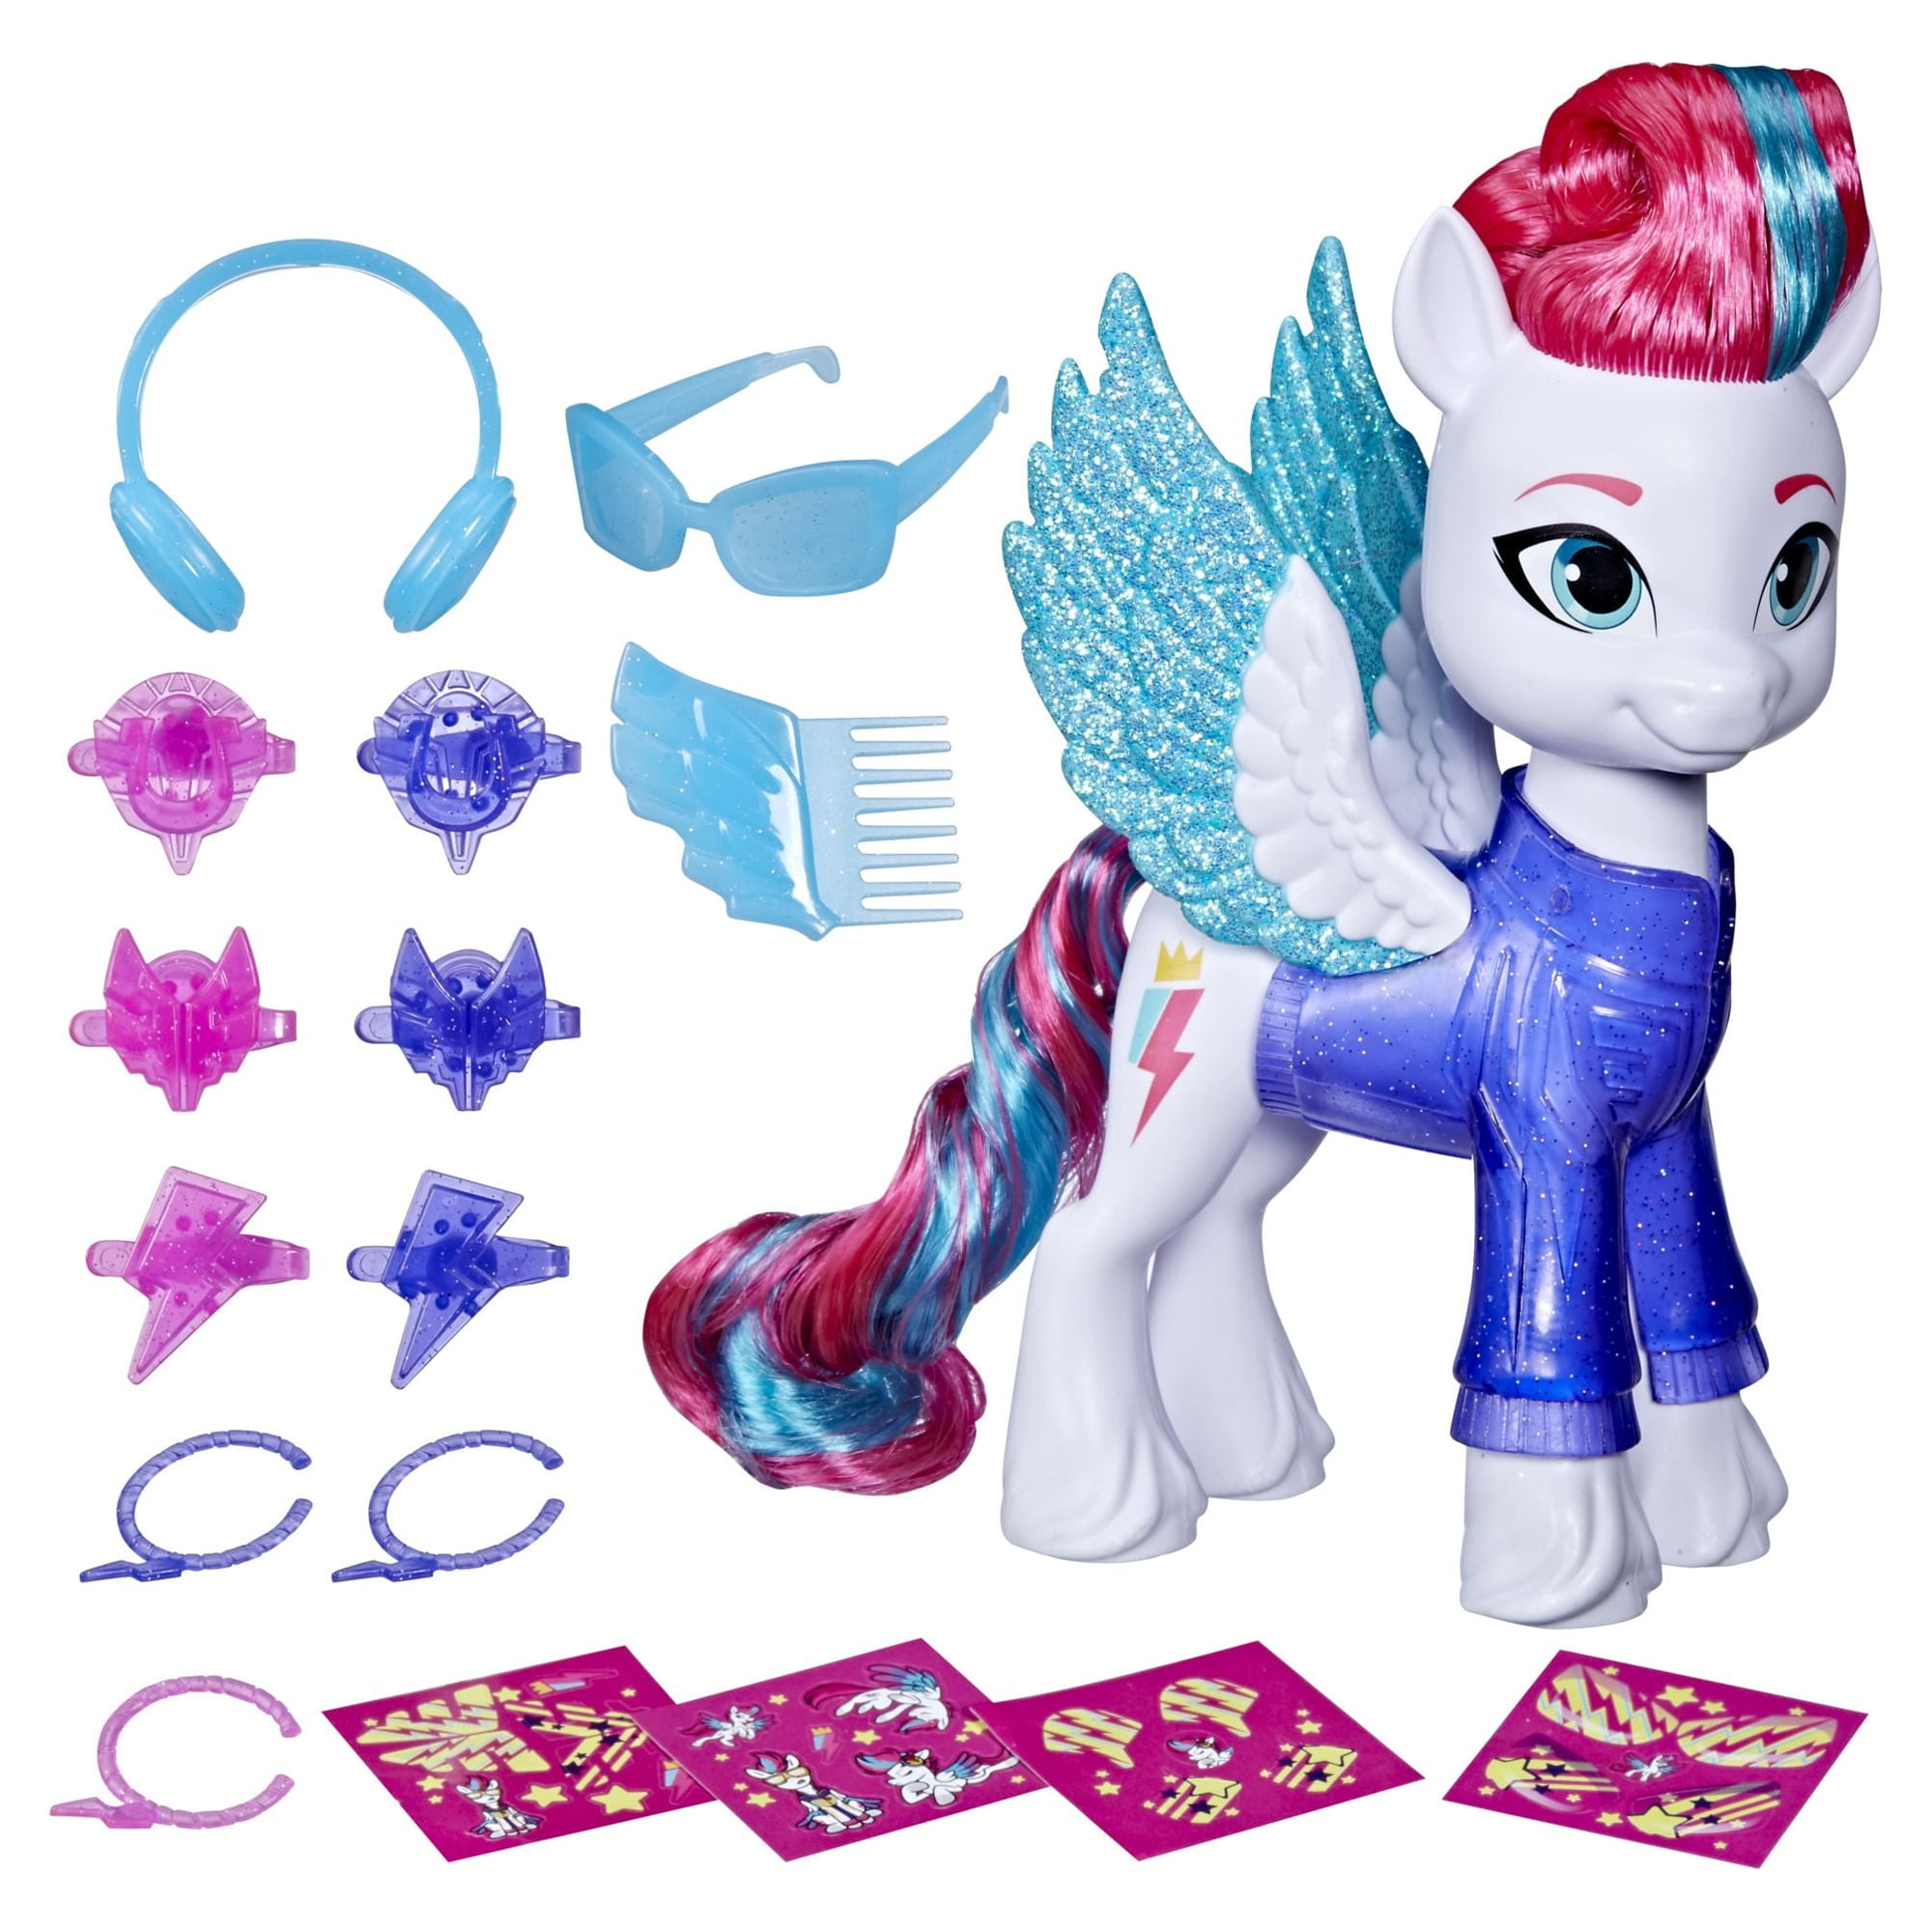  My Little Pony Toys Zipp Storm Style of The Day, 5-Inch Hair  Styling Dolls with Fashions, Toys for 5 Year Old Girls and Boys : Toys &  Games